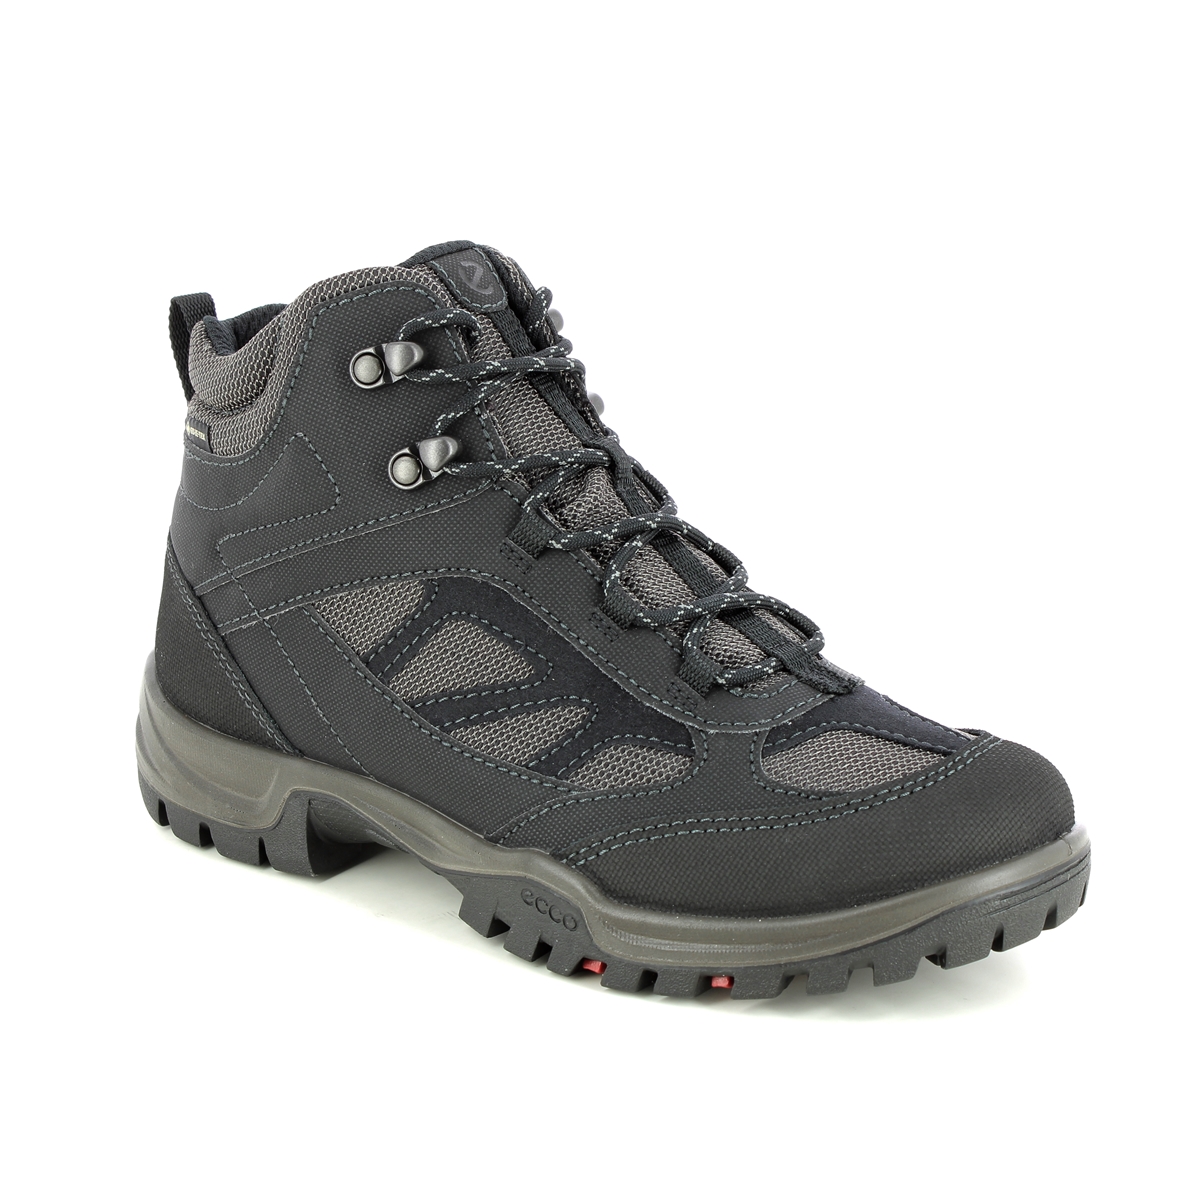 Ecco Xpedition W Mid Gtx Black Womens Walking Boots 811273-51526 In Size 40 In Plain Black